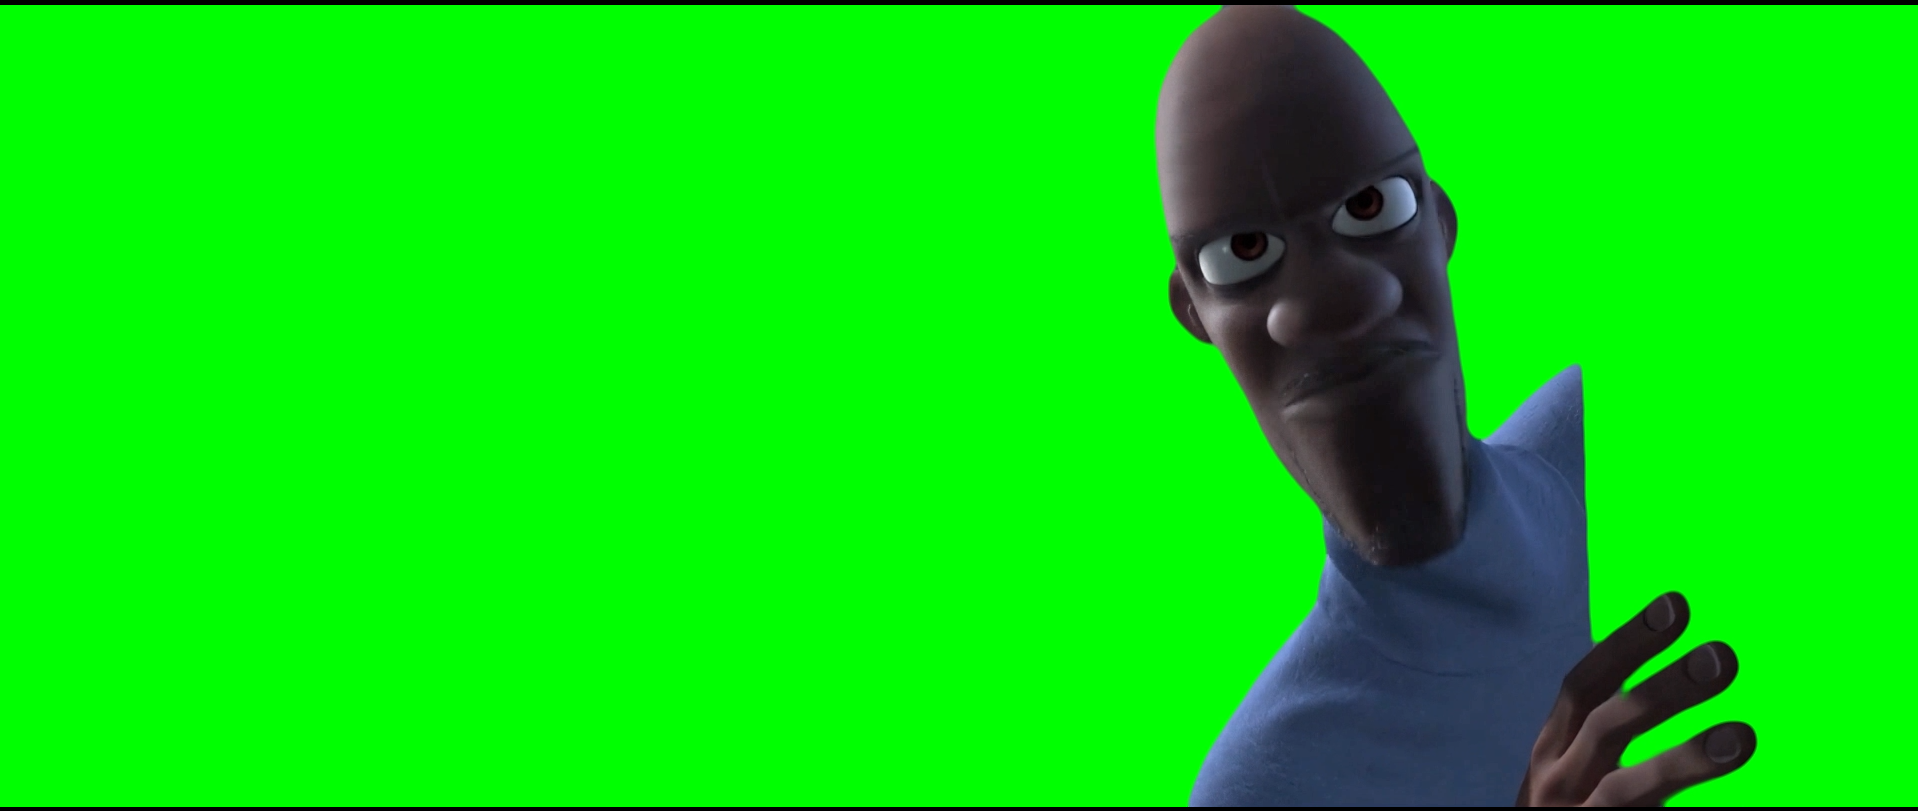 Frozone arguing with his wife - The Incredibles (Green Screen)